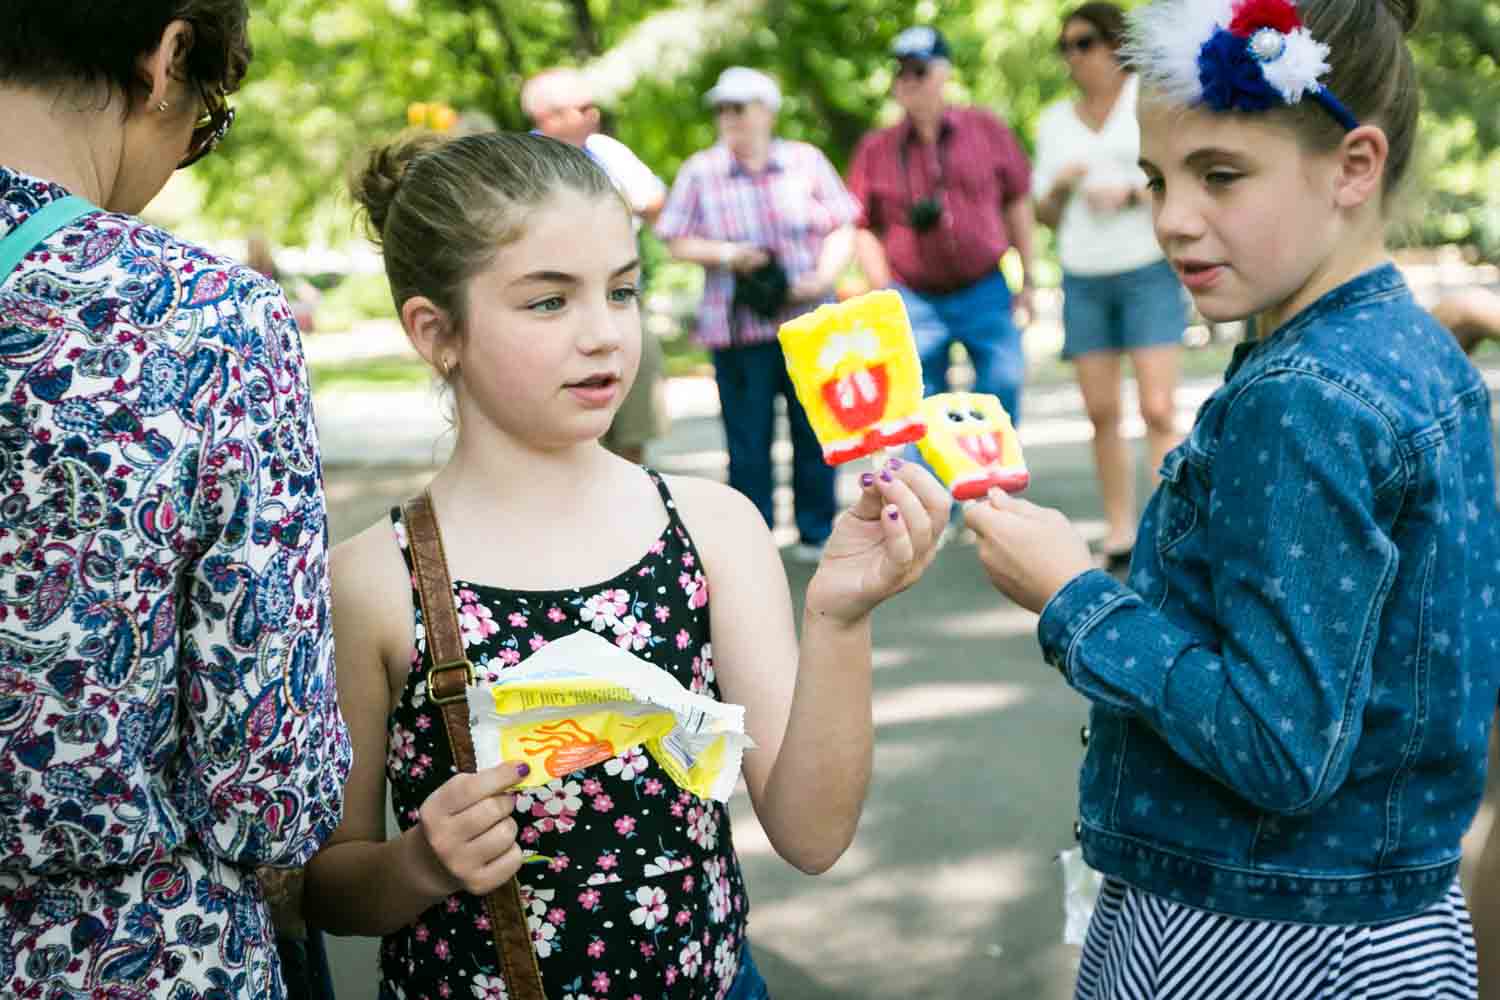 Two little girls in Central Park holding Spongebob ice creams